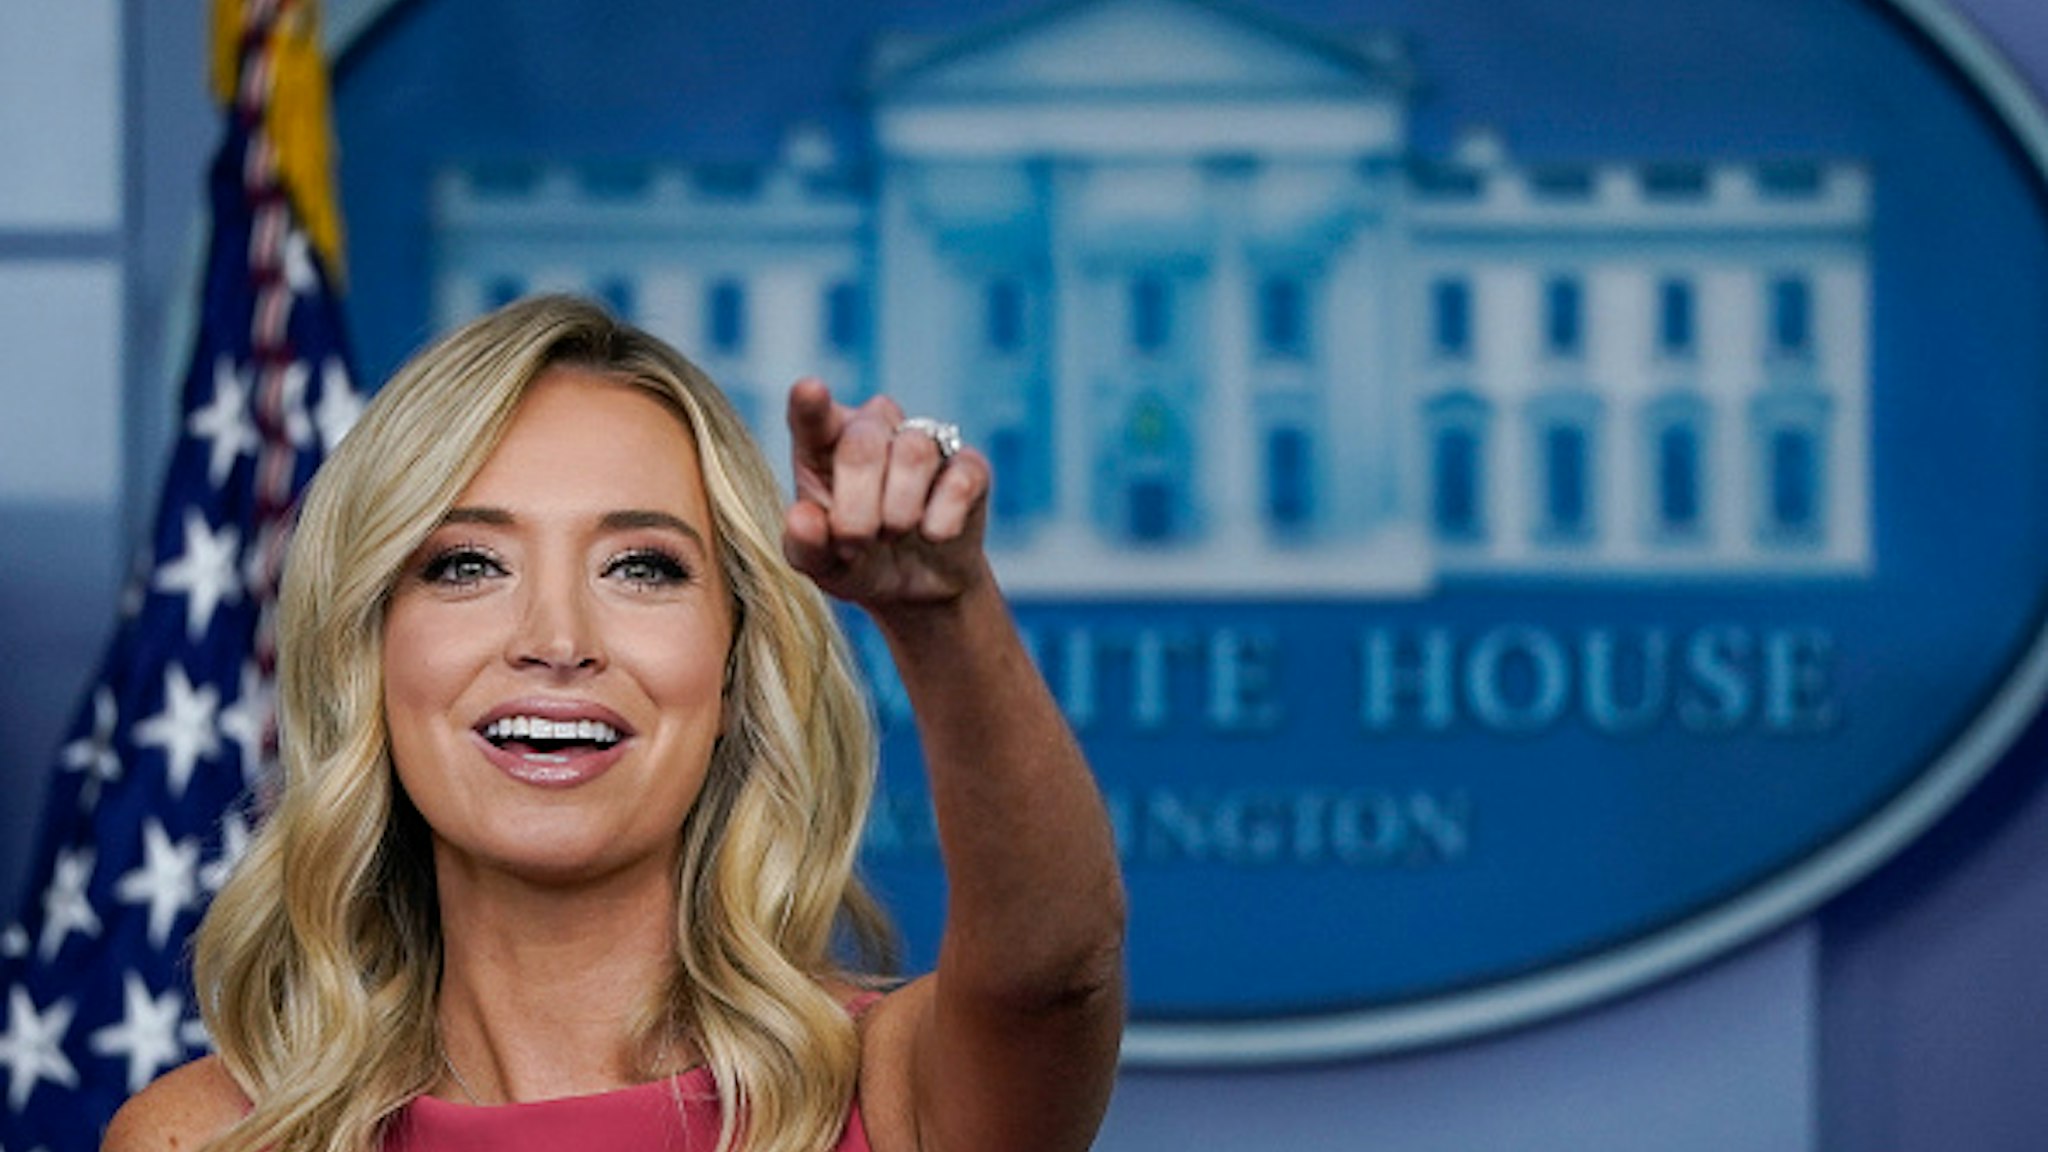 WASHINGTON, DC - JUNE 08: White House Press Secretary Kayleigh McEnany speaks during a press briefing at the White House on June 8, 2020 in Washington, DC. President Trump will meet with law enforcement officers later in the day on Monday.